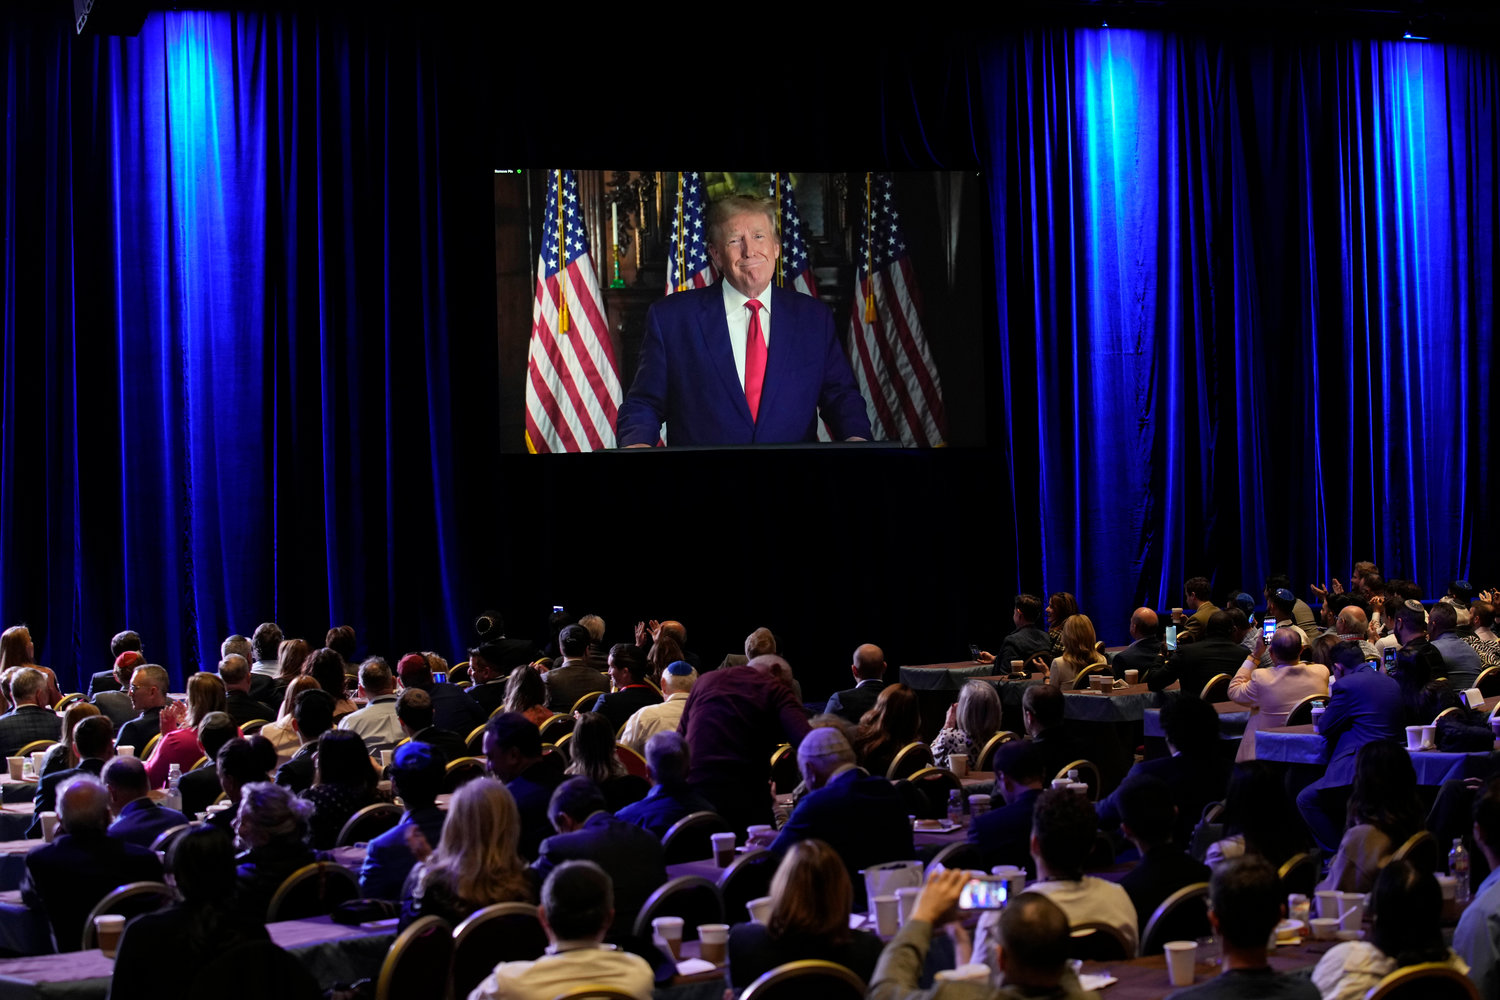 FILE - People listen as former President Donald Trump speaks remotely to an annual leadership meeting of the Republican Jewish Coalition Nov. 19, 2022, in Las Vegas. Trump has spent years teasing the prospect of another presidential run. But in the first week since announcing his third bid for the White House, he's done little to suggest that he's organizing a traditional campaign. (AP Photo/John Locher, File)